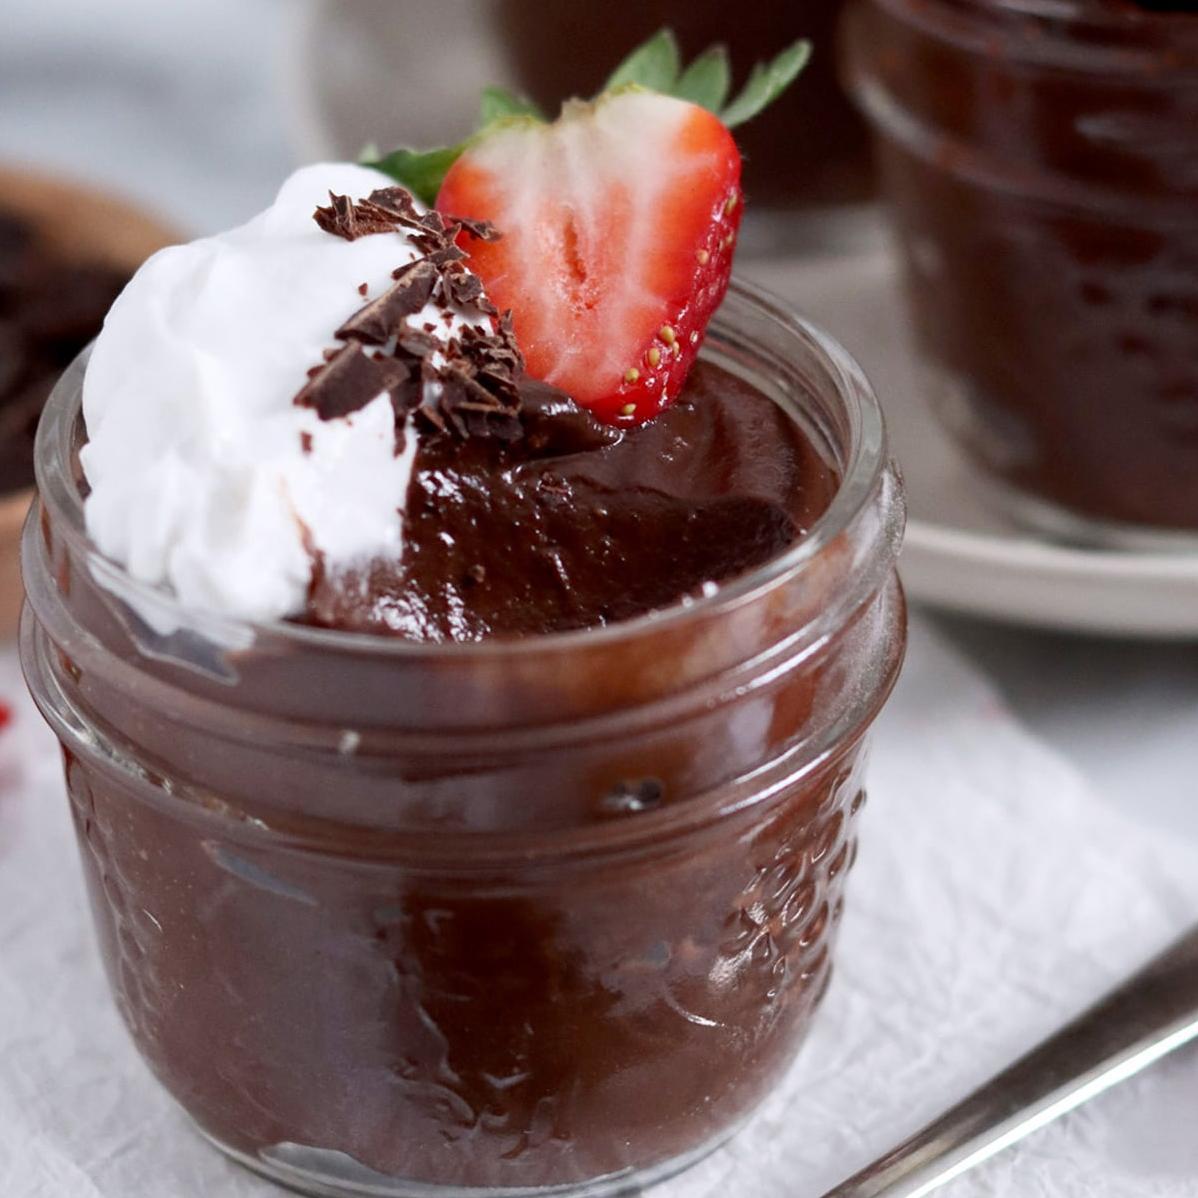  This decadent dessert is not only delicious but also nutritious.